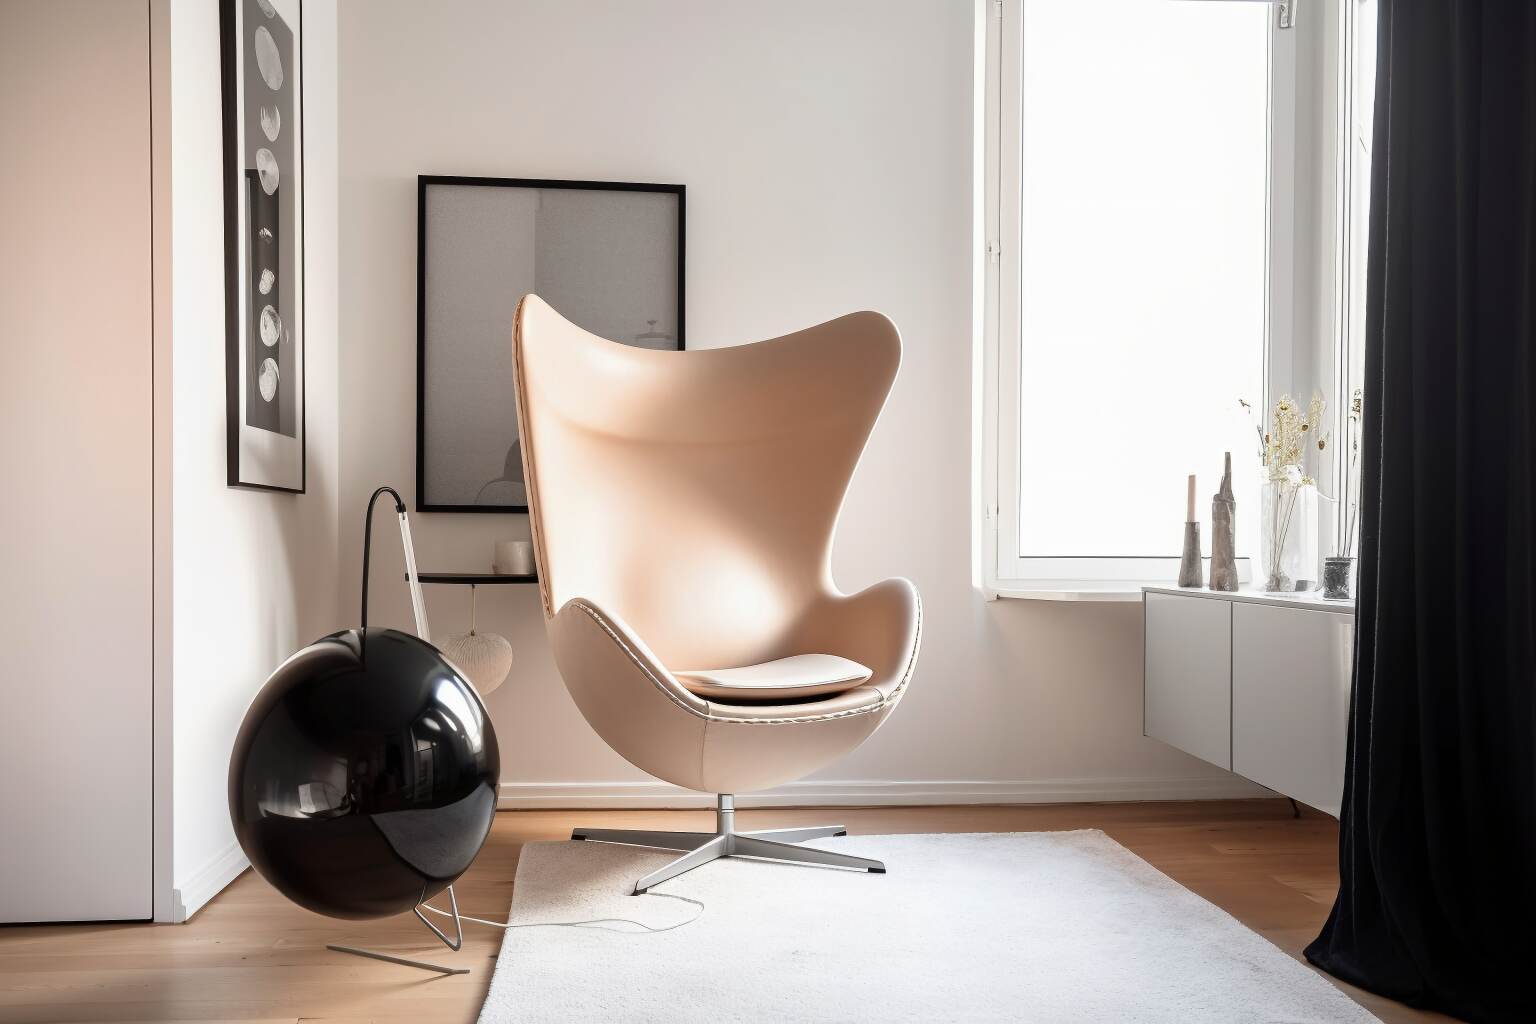 Small Space With An Egg Chair As A Focal Point